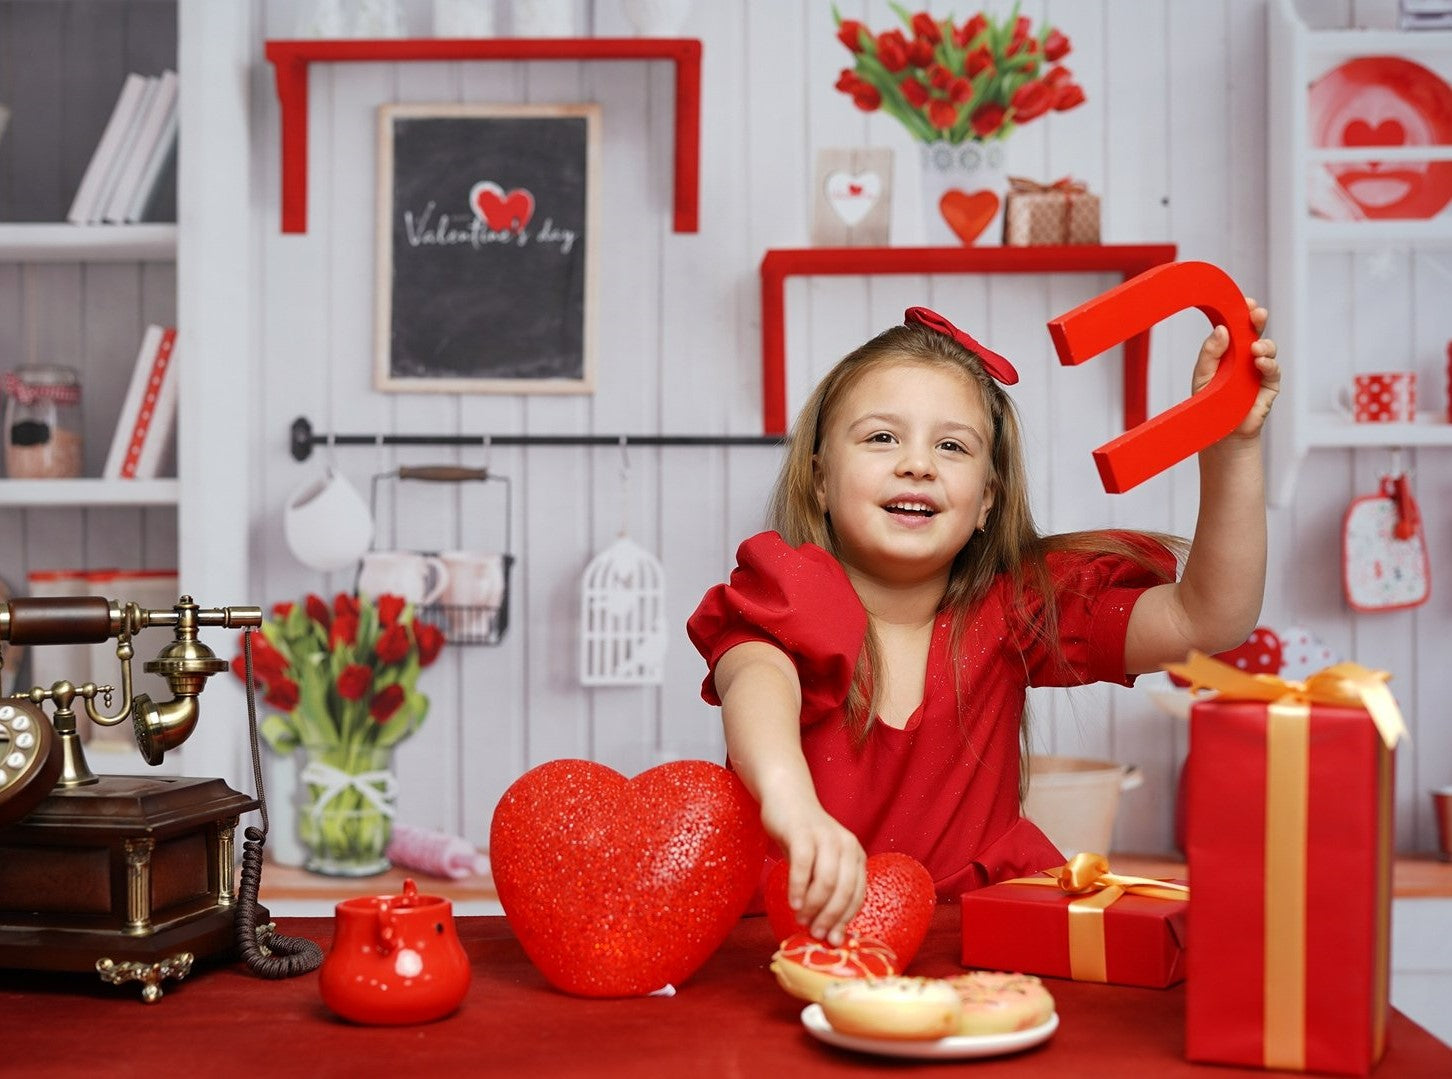 Kate Valentine's Day Love Bake Kitchen Backdrop for Photography